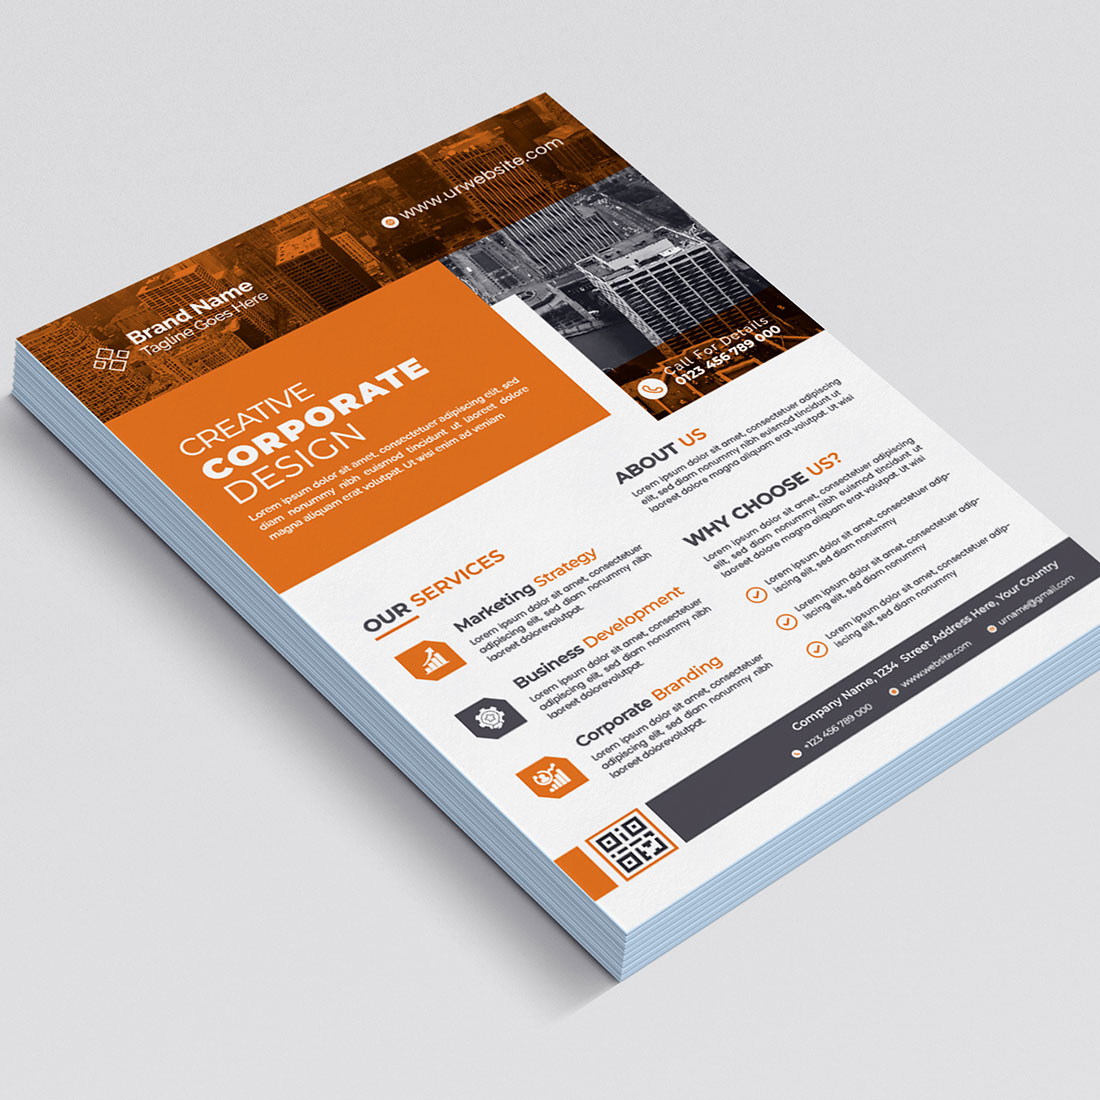 Brochure with a orange and black design.